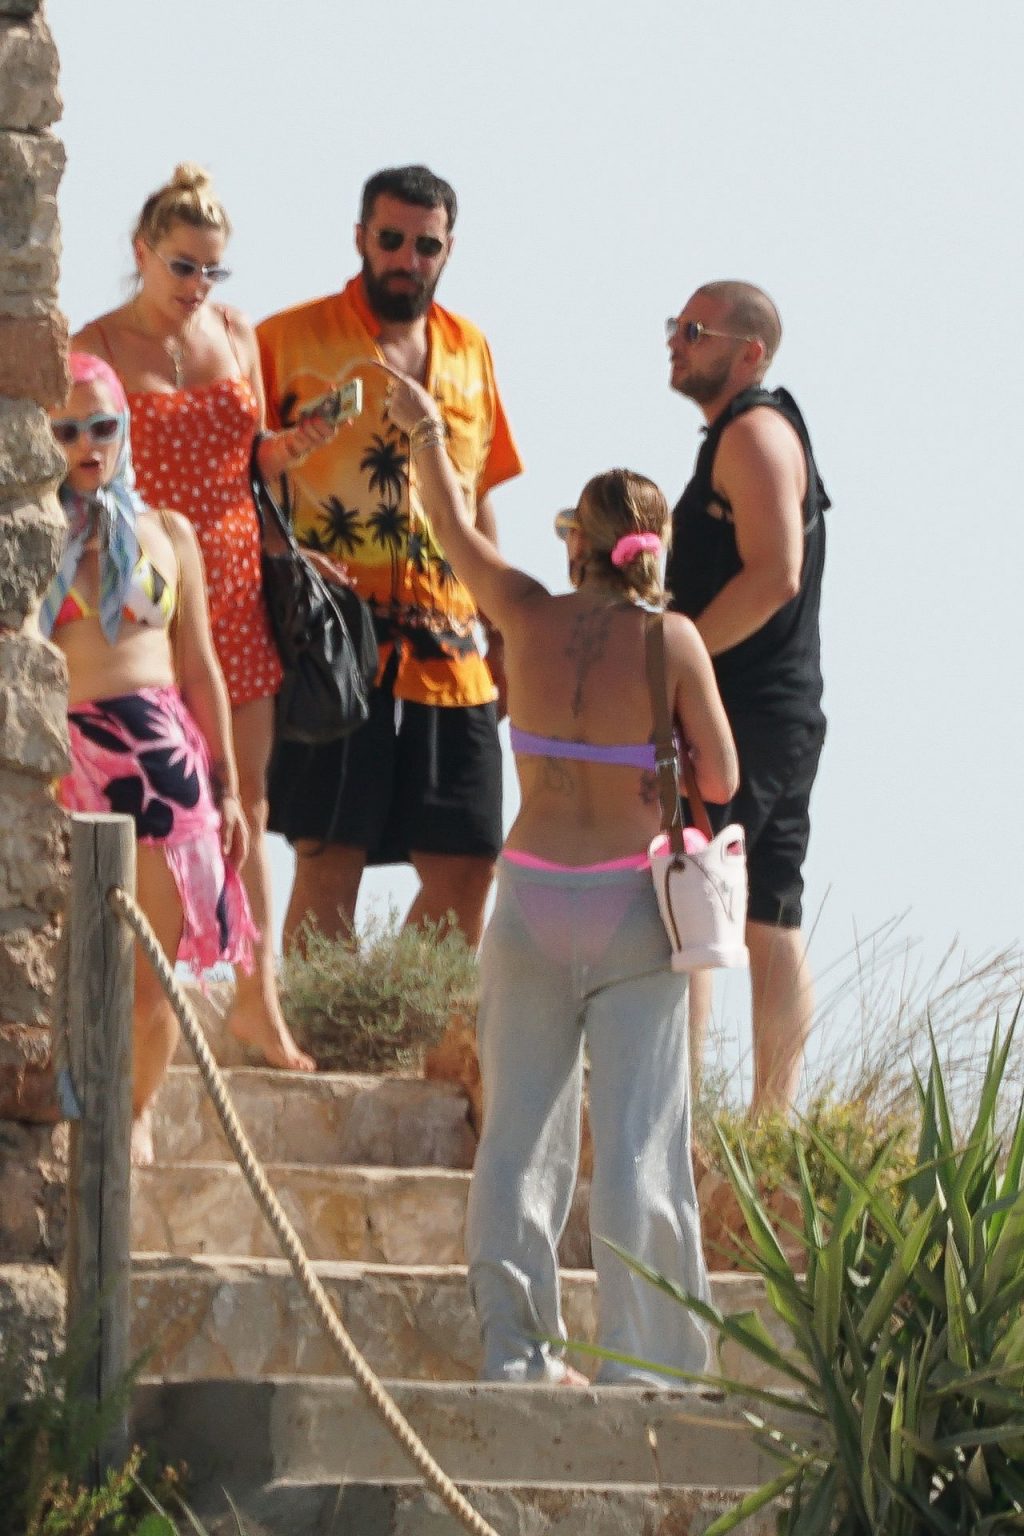 Rita Ora Goes Nude While on Holiday with Romain Gavras (55 Photos + Videos)